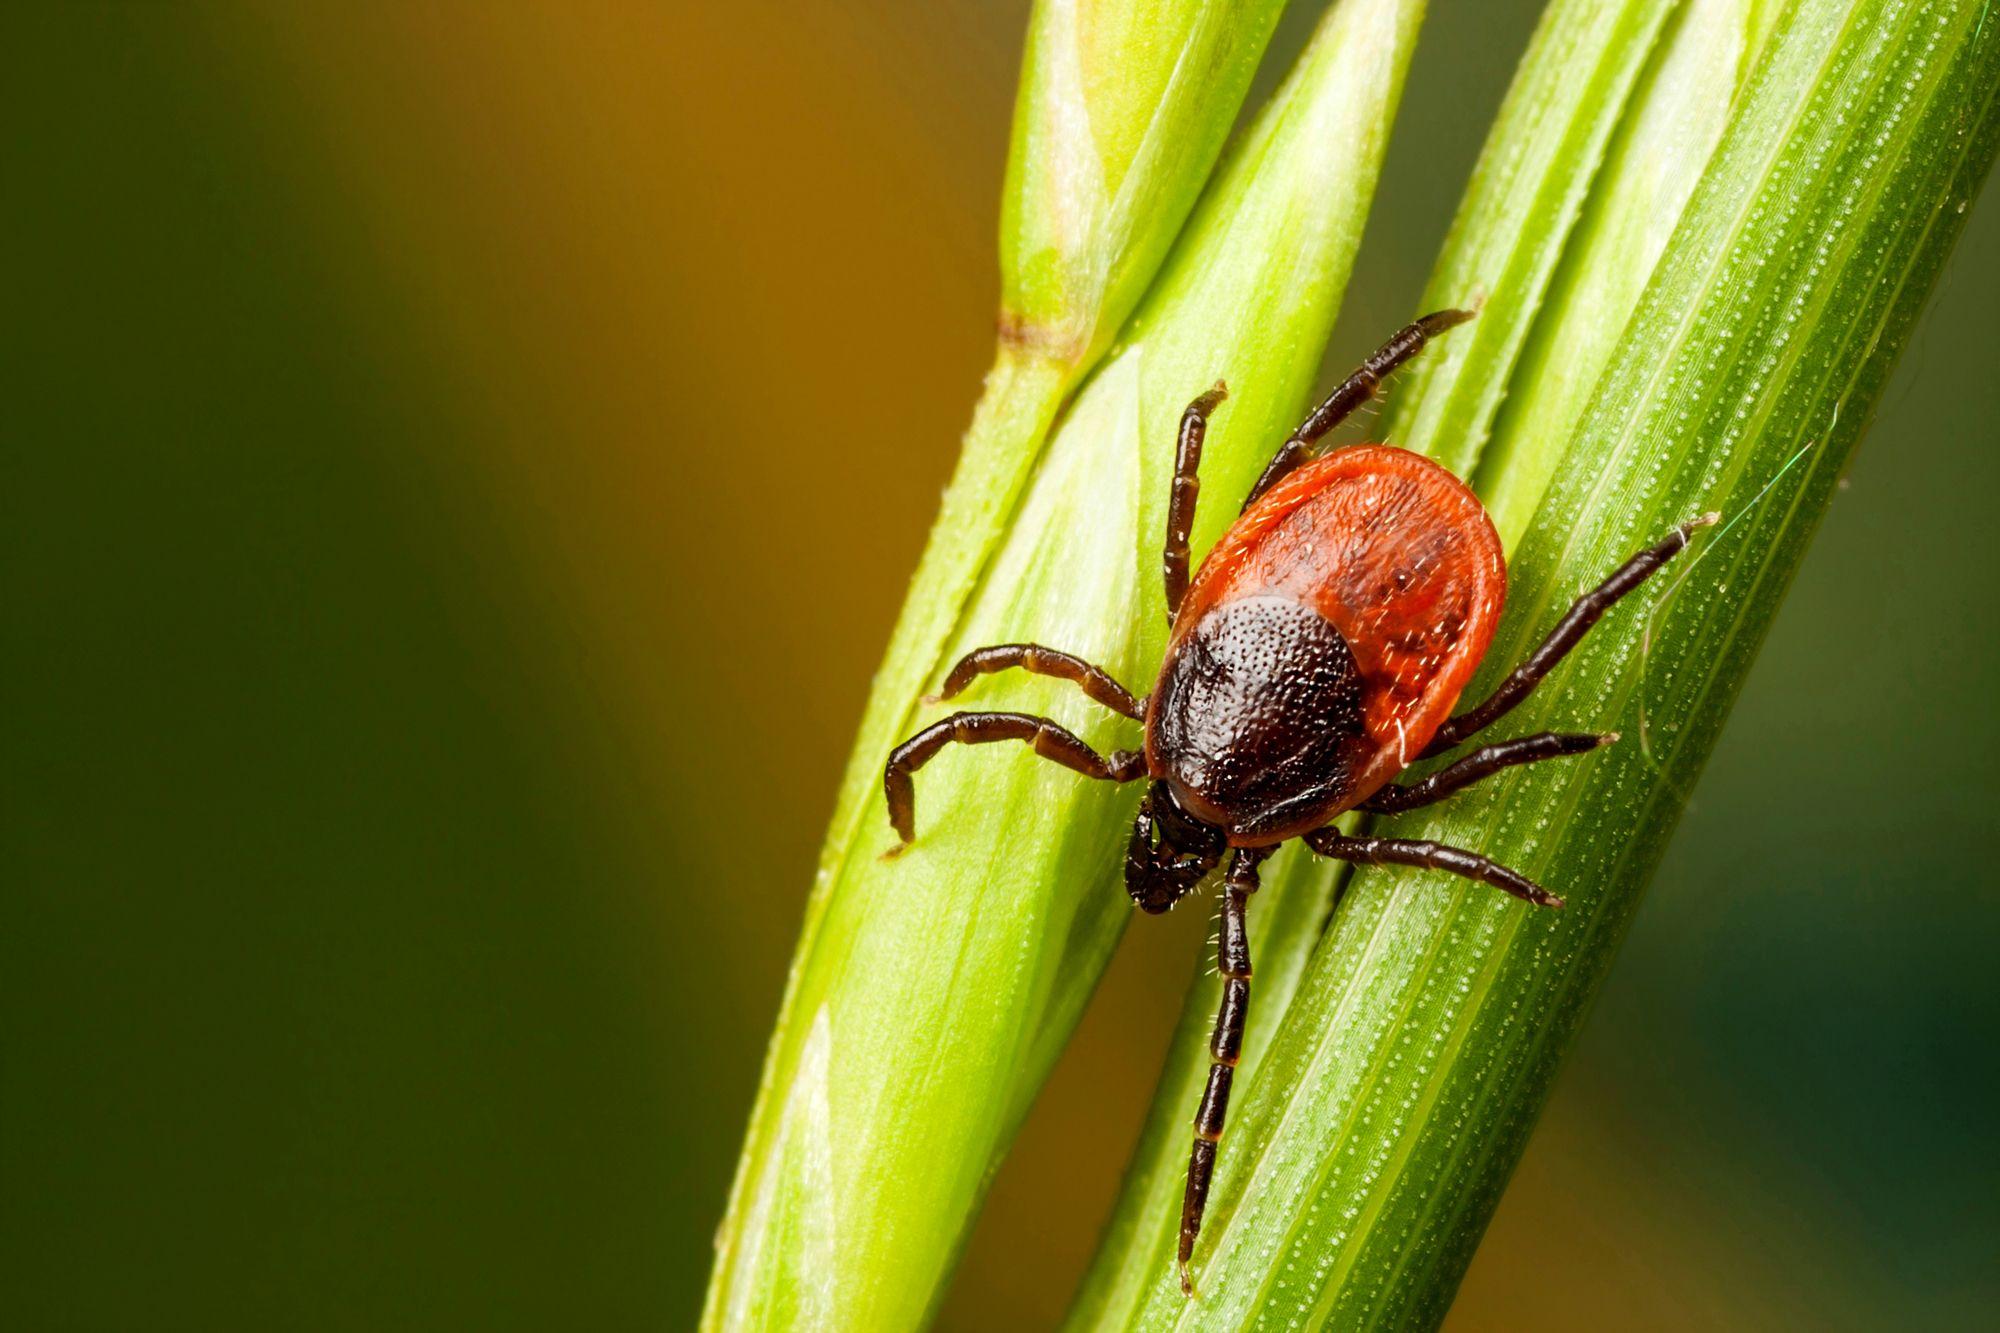 How To Protect Yourself and Your Animals from Ticks